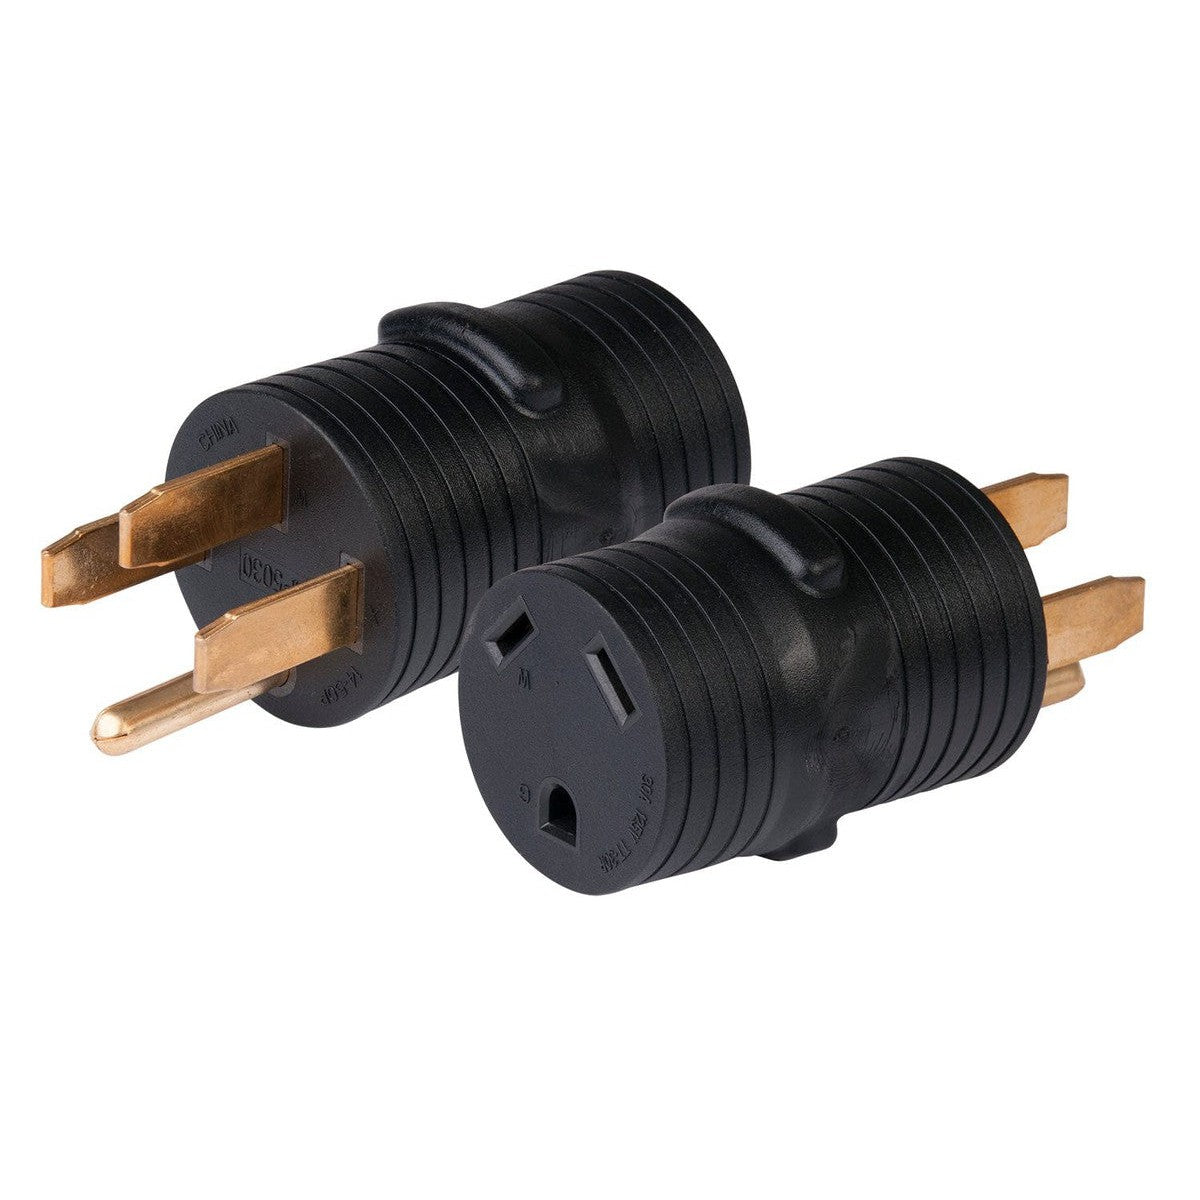 ParkPower Qualifies for Free Shipping ParkPower One-Piece Adapter 50a Male to 30a Female #5030RVSA